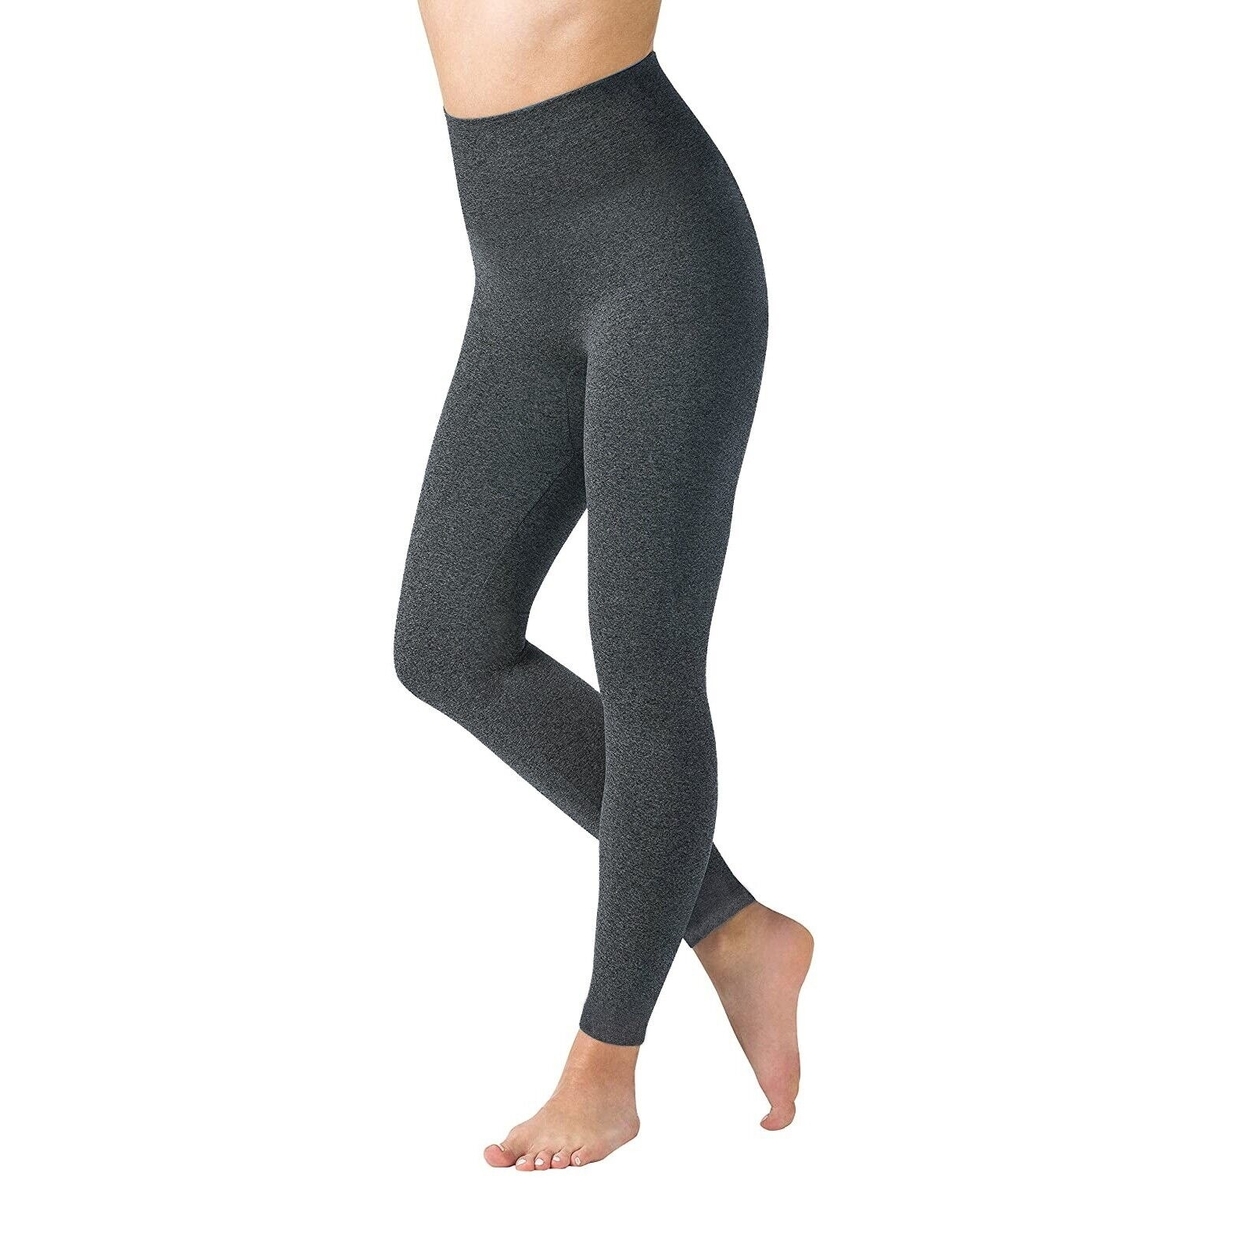 Women's Winter Warm Marled High Waist Fleece Lined Thick Thermal Leggings Pants - Charcoal, 2x